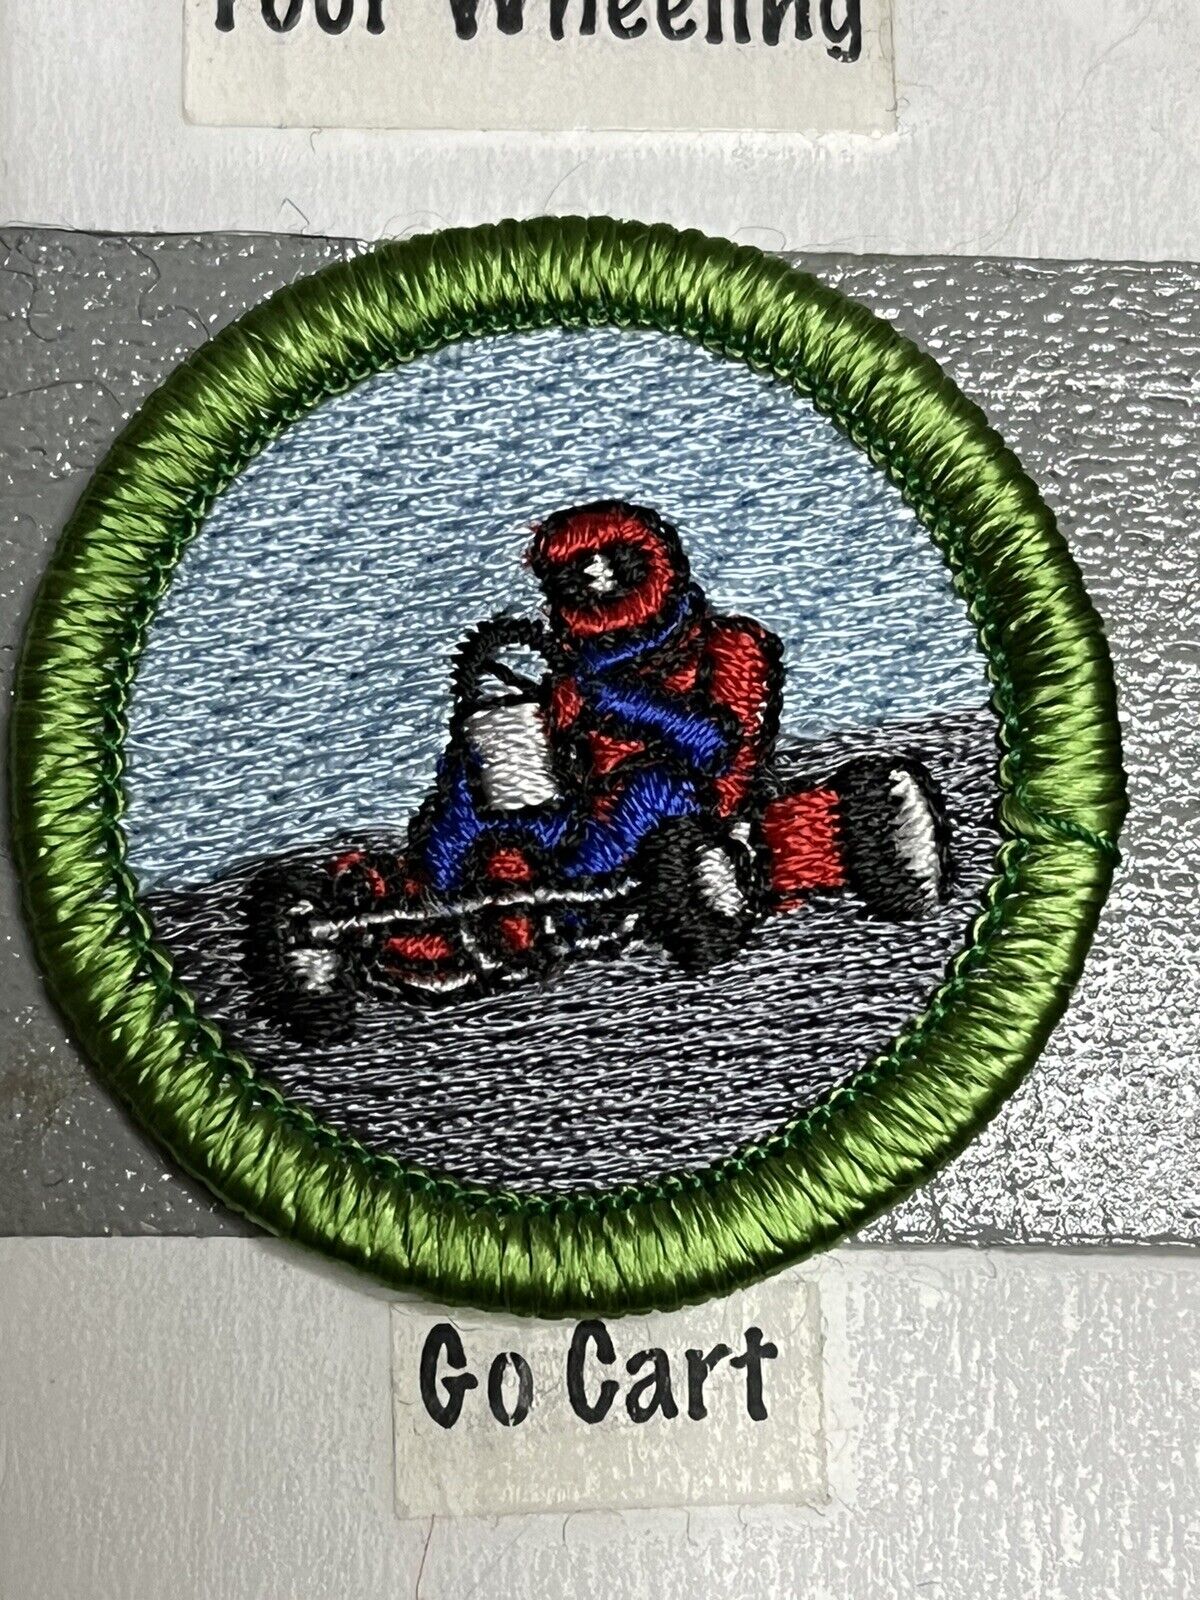 GO CART KART FUN MERIT BADGE PATCH BOY SCOUT PATCH FUNNY SPOOF BS